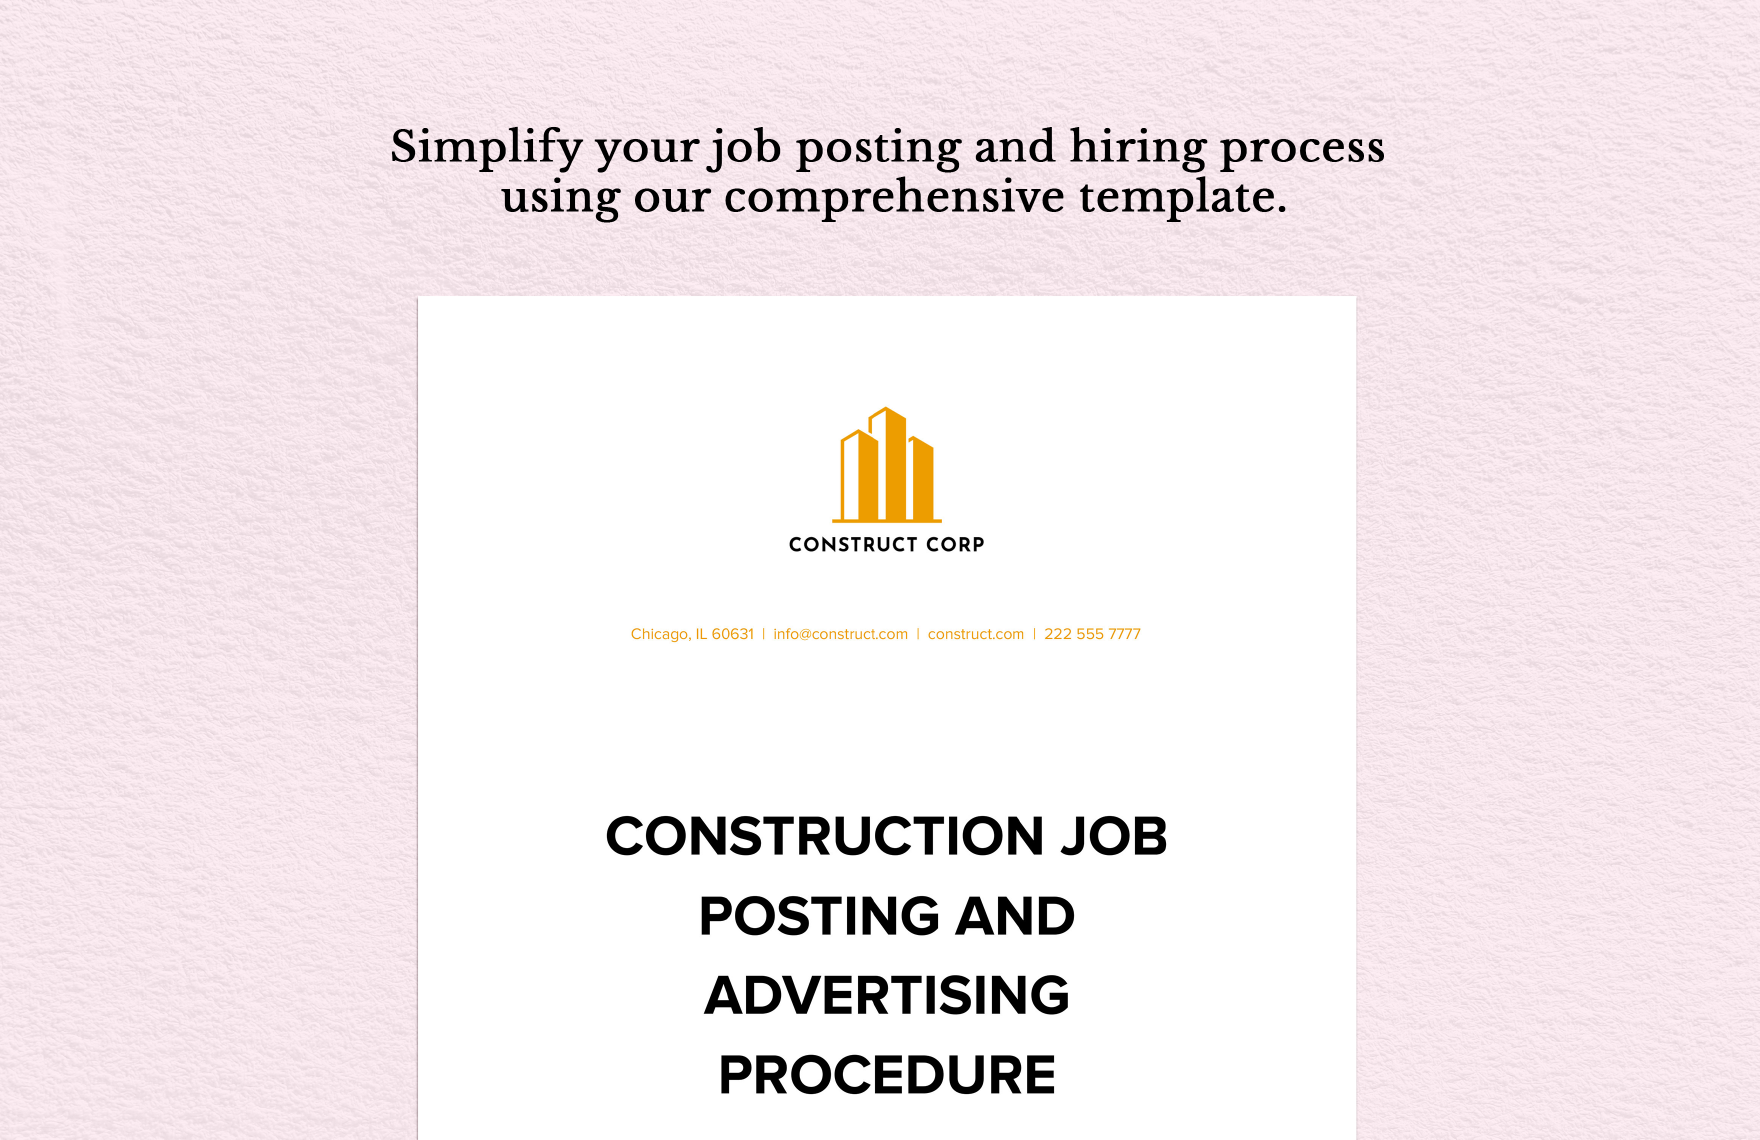 Construction Job Posting and Advertising Procedure 